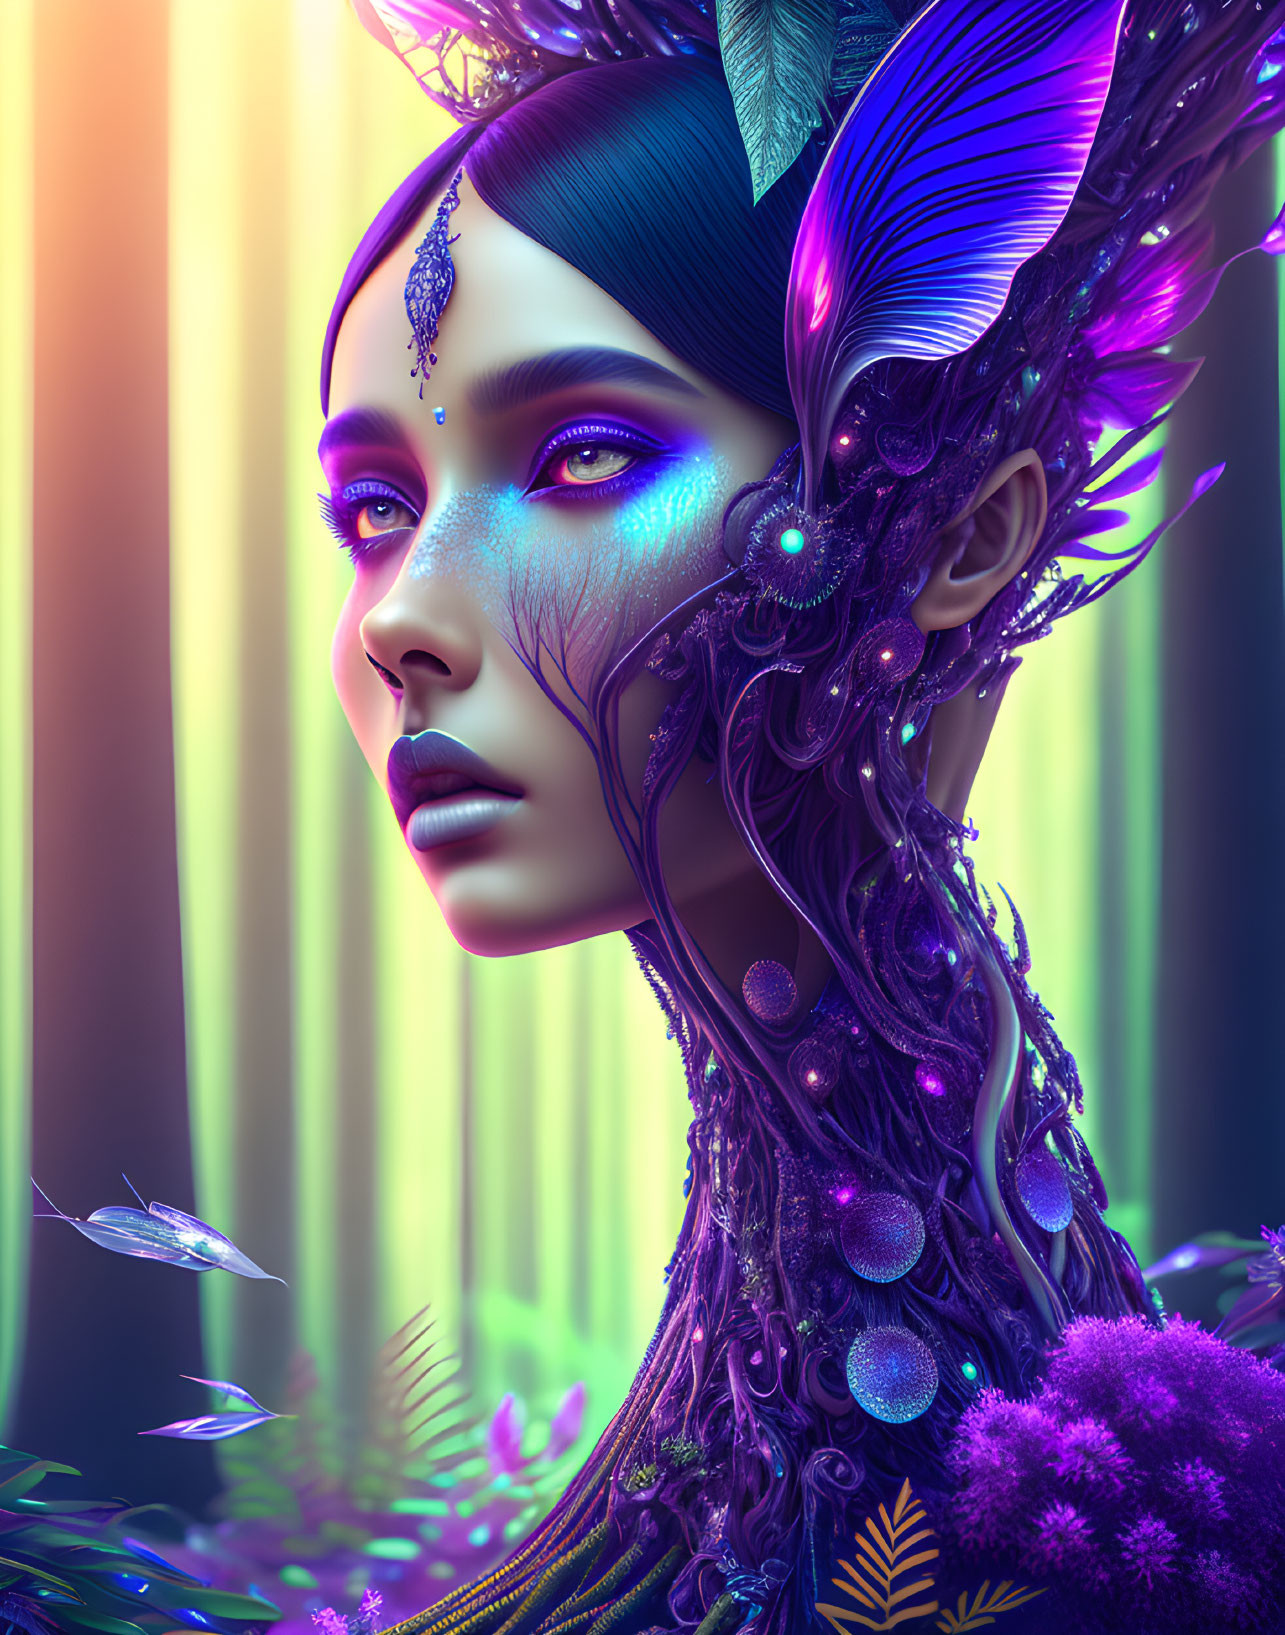 Fantasy portrait of a woman with purple skin and elaborate feather headdress